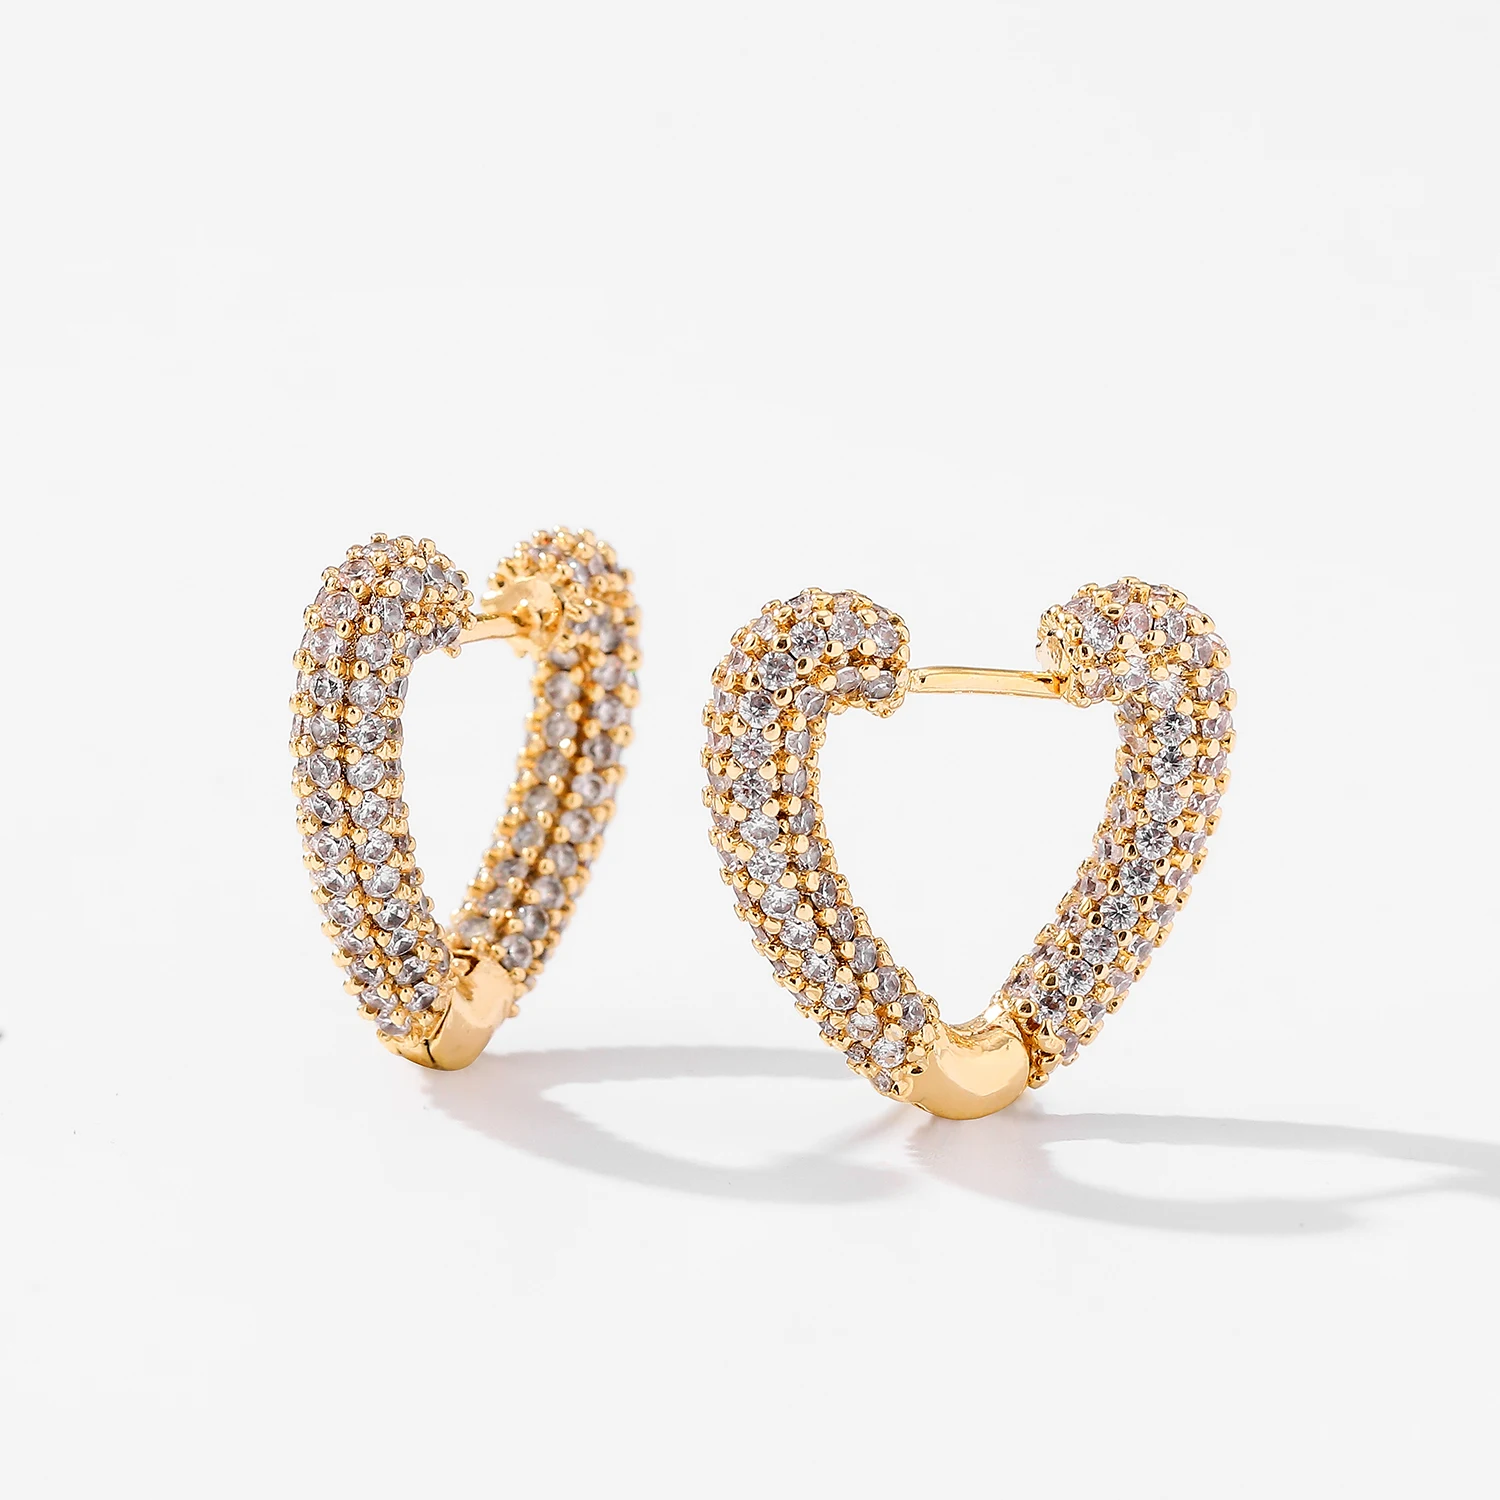 

14K Real Gold Plated Sparkly Rhinestone 5A CZ Pave Heart Dangle Hoop Earrings Small Diamond Hoop Earrings for Women